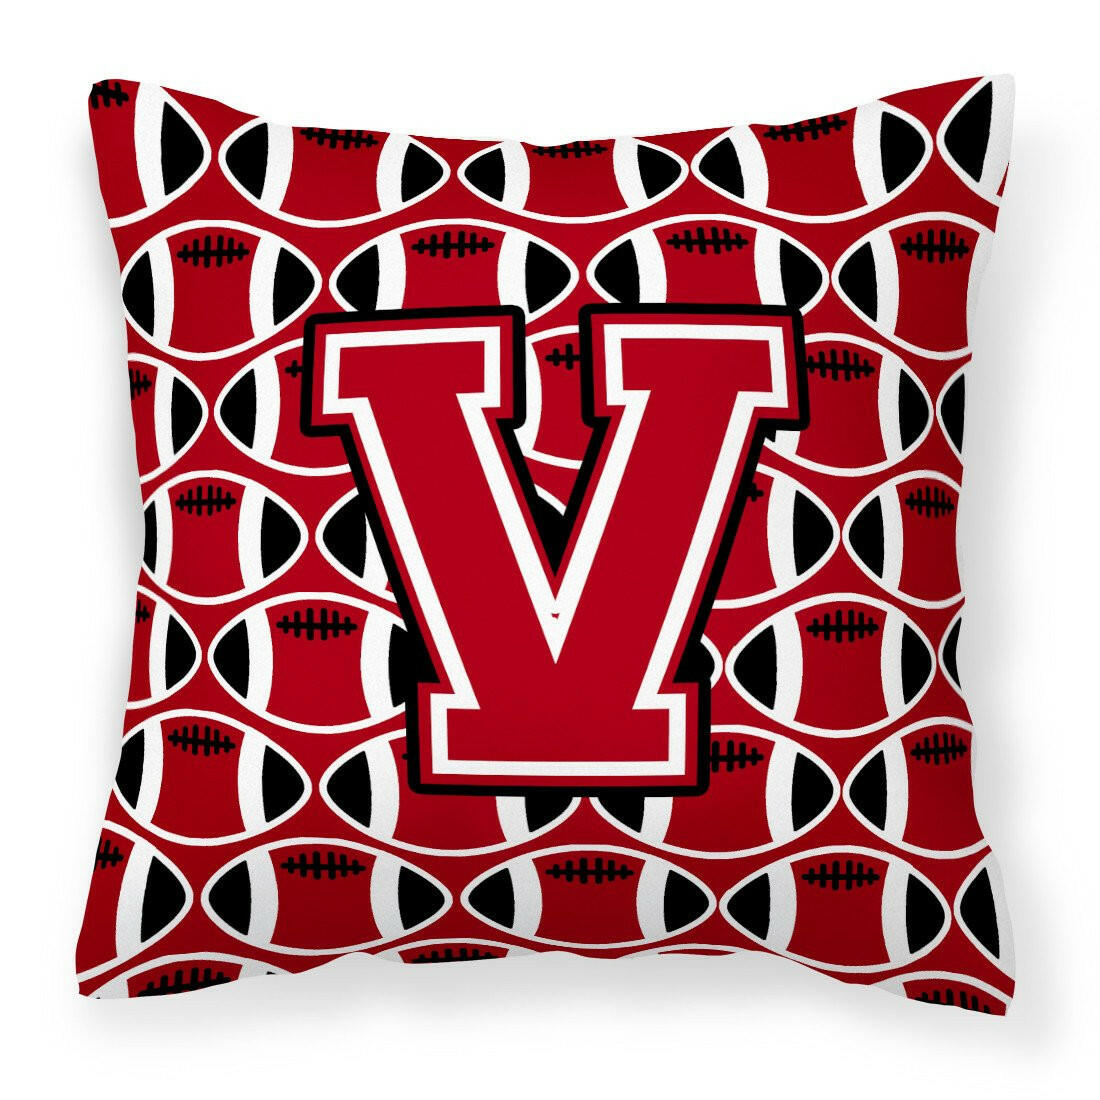 Letter V Football Red, Black and White Fabric Decorative Pillow CJ1073-VPW1414 by Caroline's Treasures